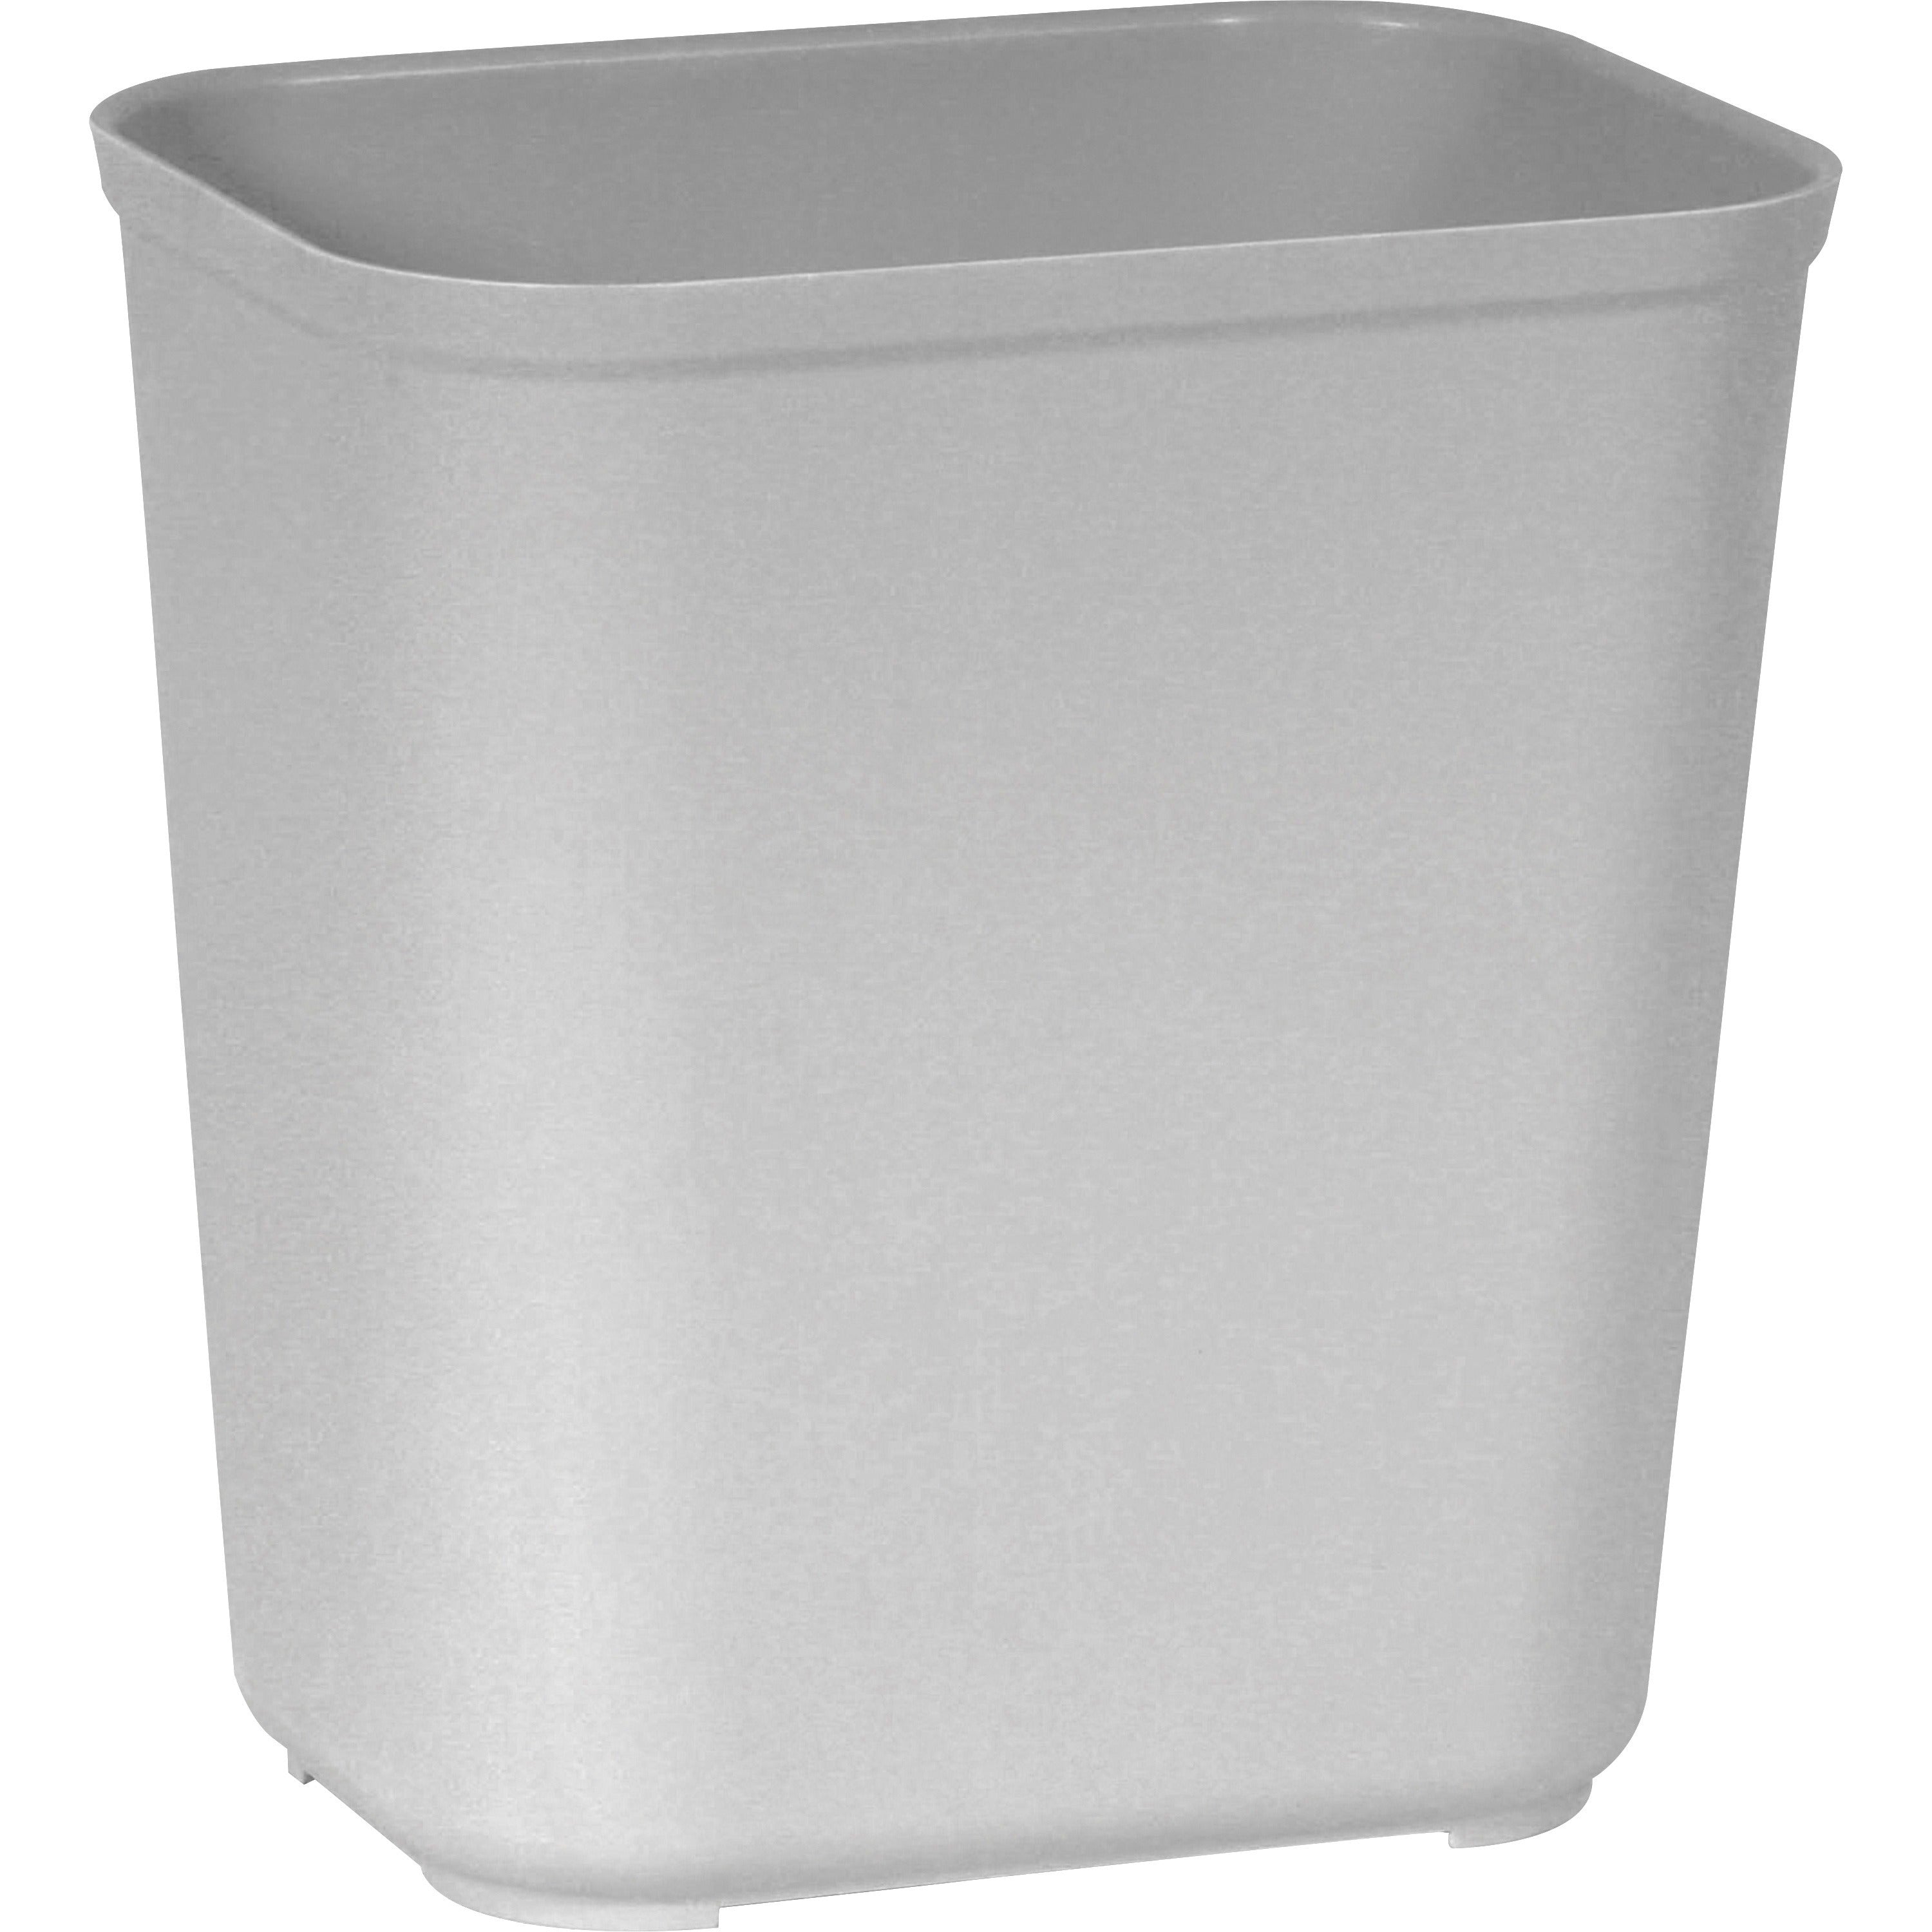 rubbermaid-commercial-28-quart-fire-resistant-wastebasket-7-gal-capacity-rectangular-fire-resistant-heat-resistant-impact-resistant-rust-resistant-155-height-x-145-width-x-105-depth-thermoset-polyester-gray-6-carton_rcp2543gract - 1